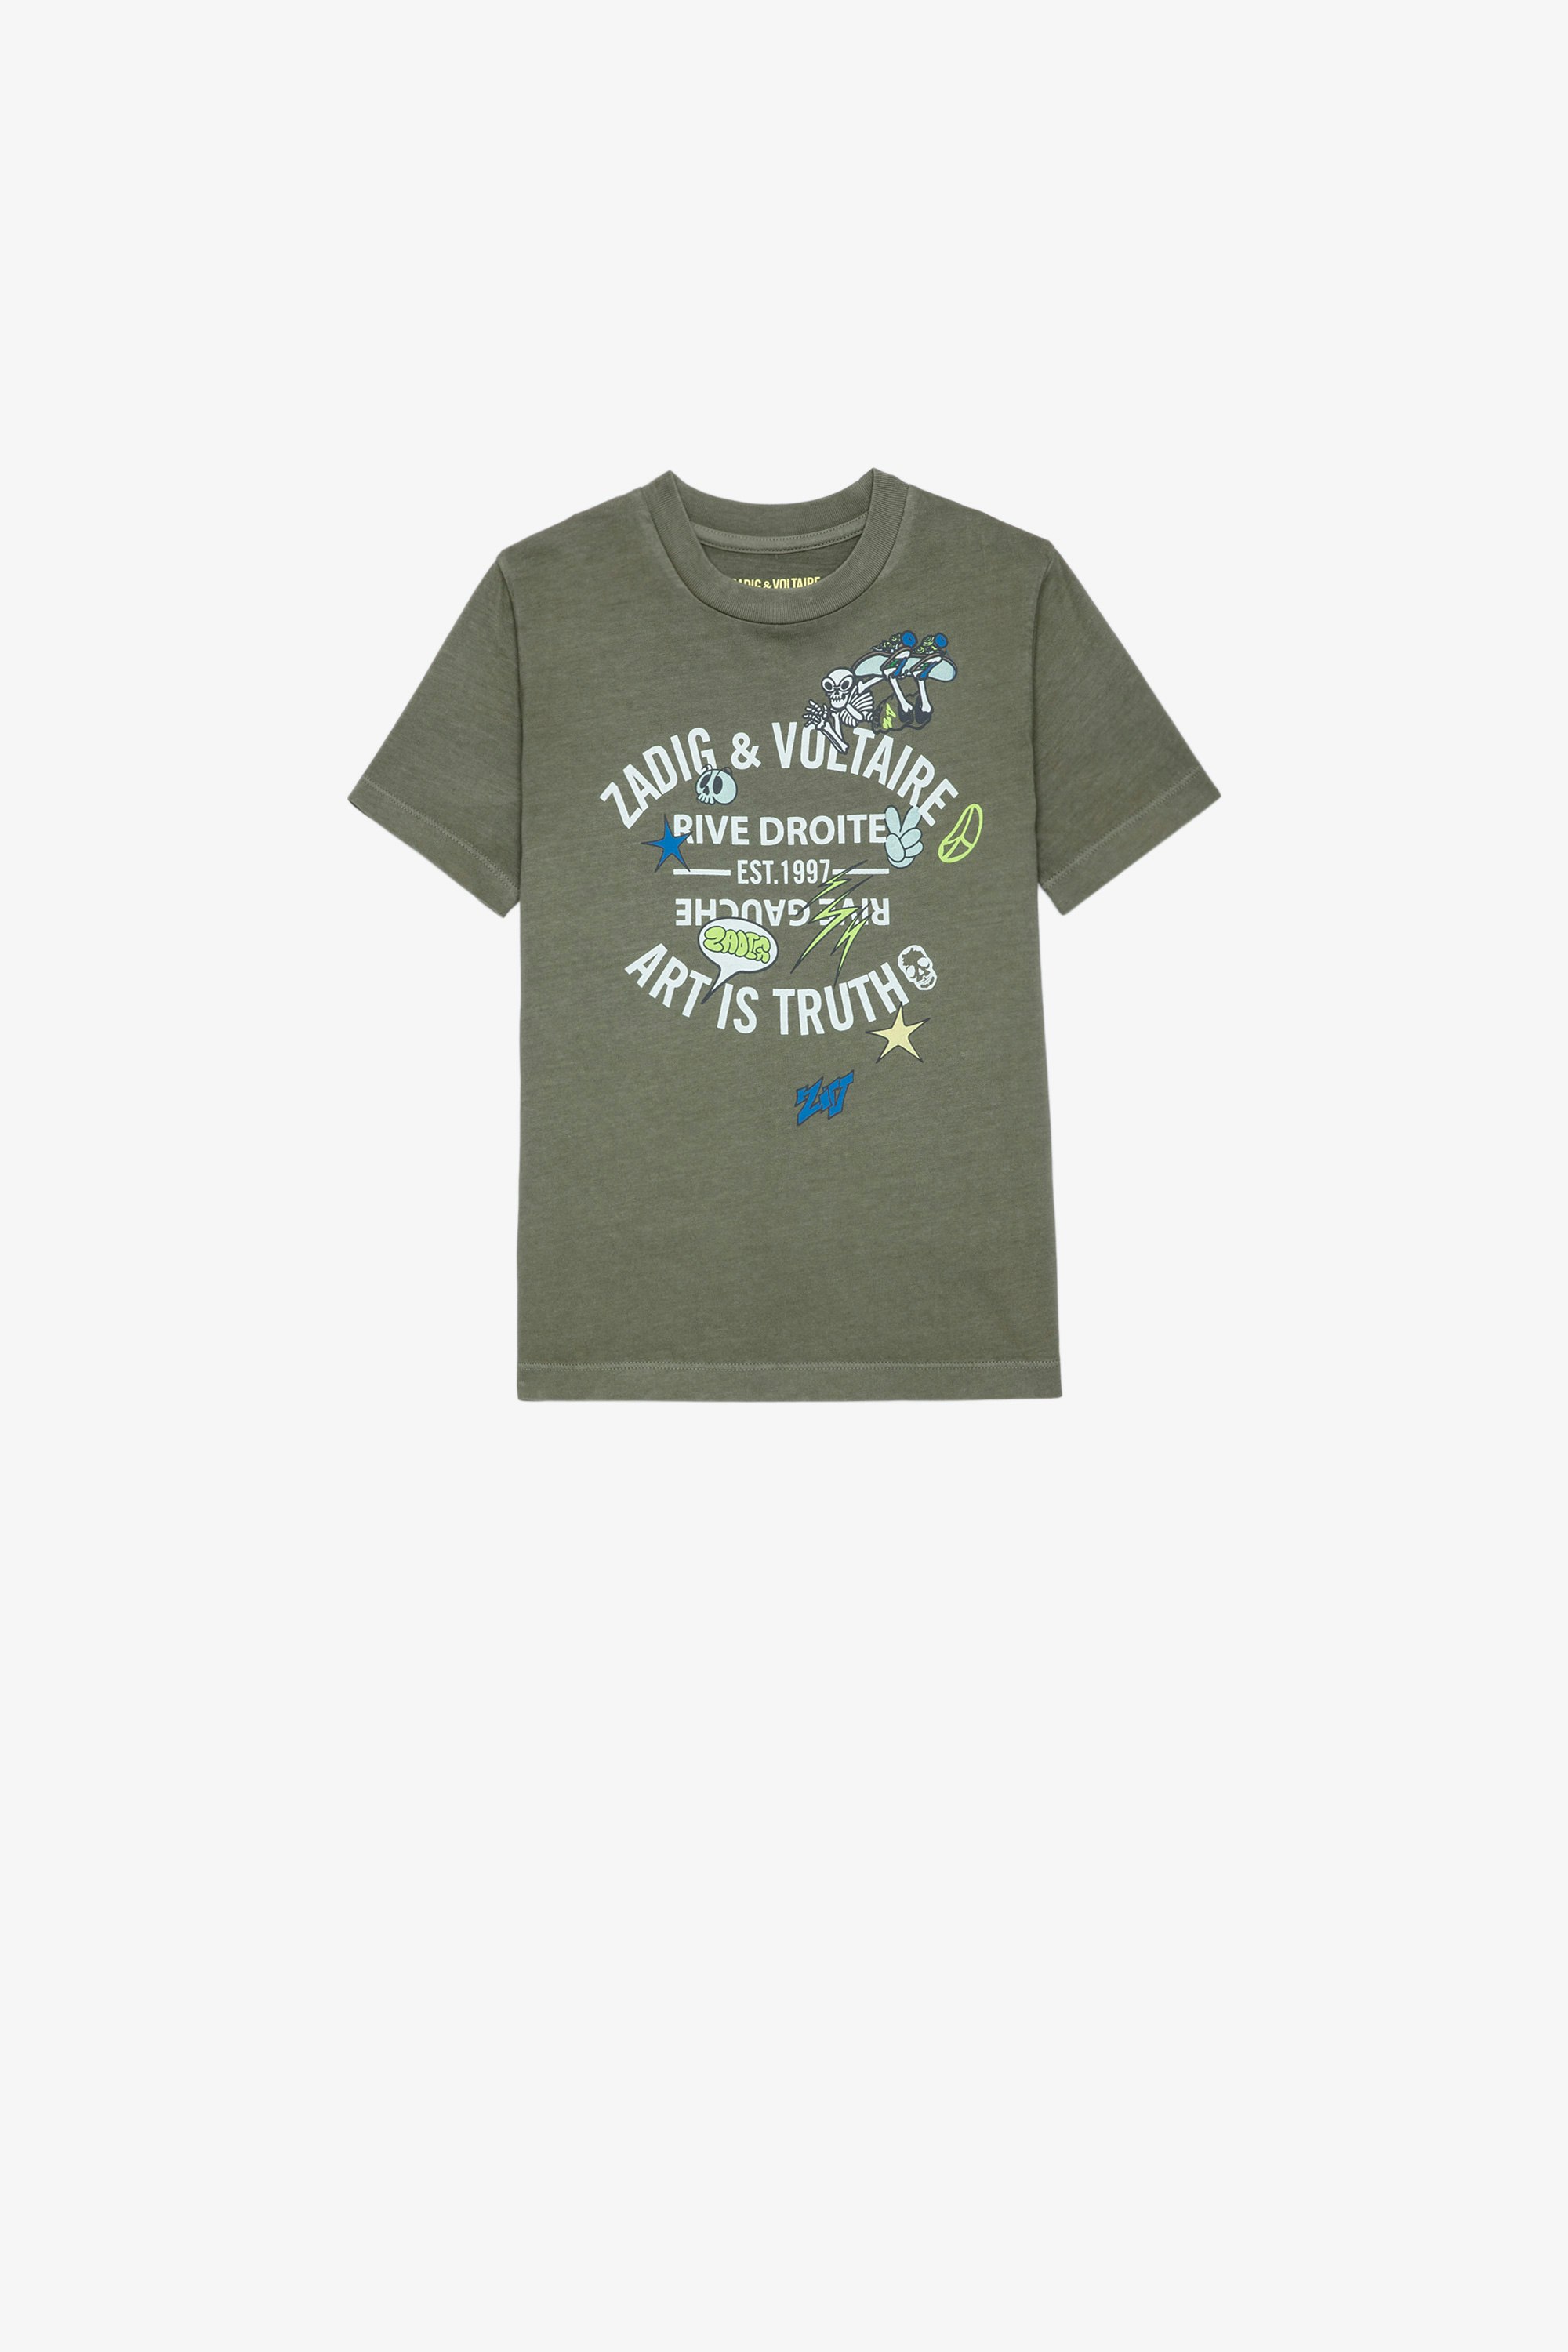 Kita Boxo Kids' T-Shirt Kids’ short-sleeve khaki cotton T-shirt with the brand insignia and Core Cho motif on the front